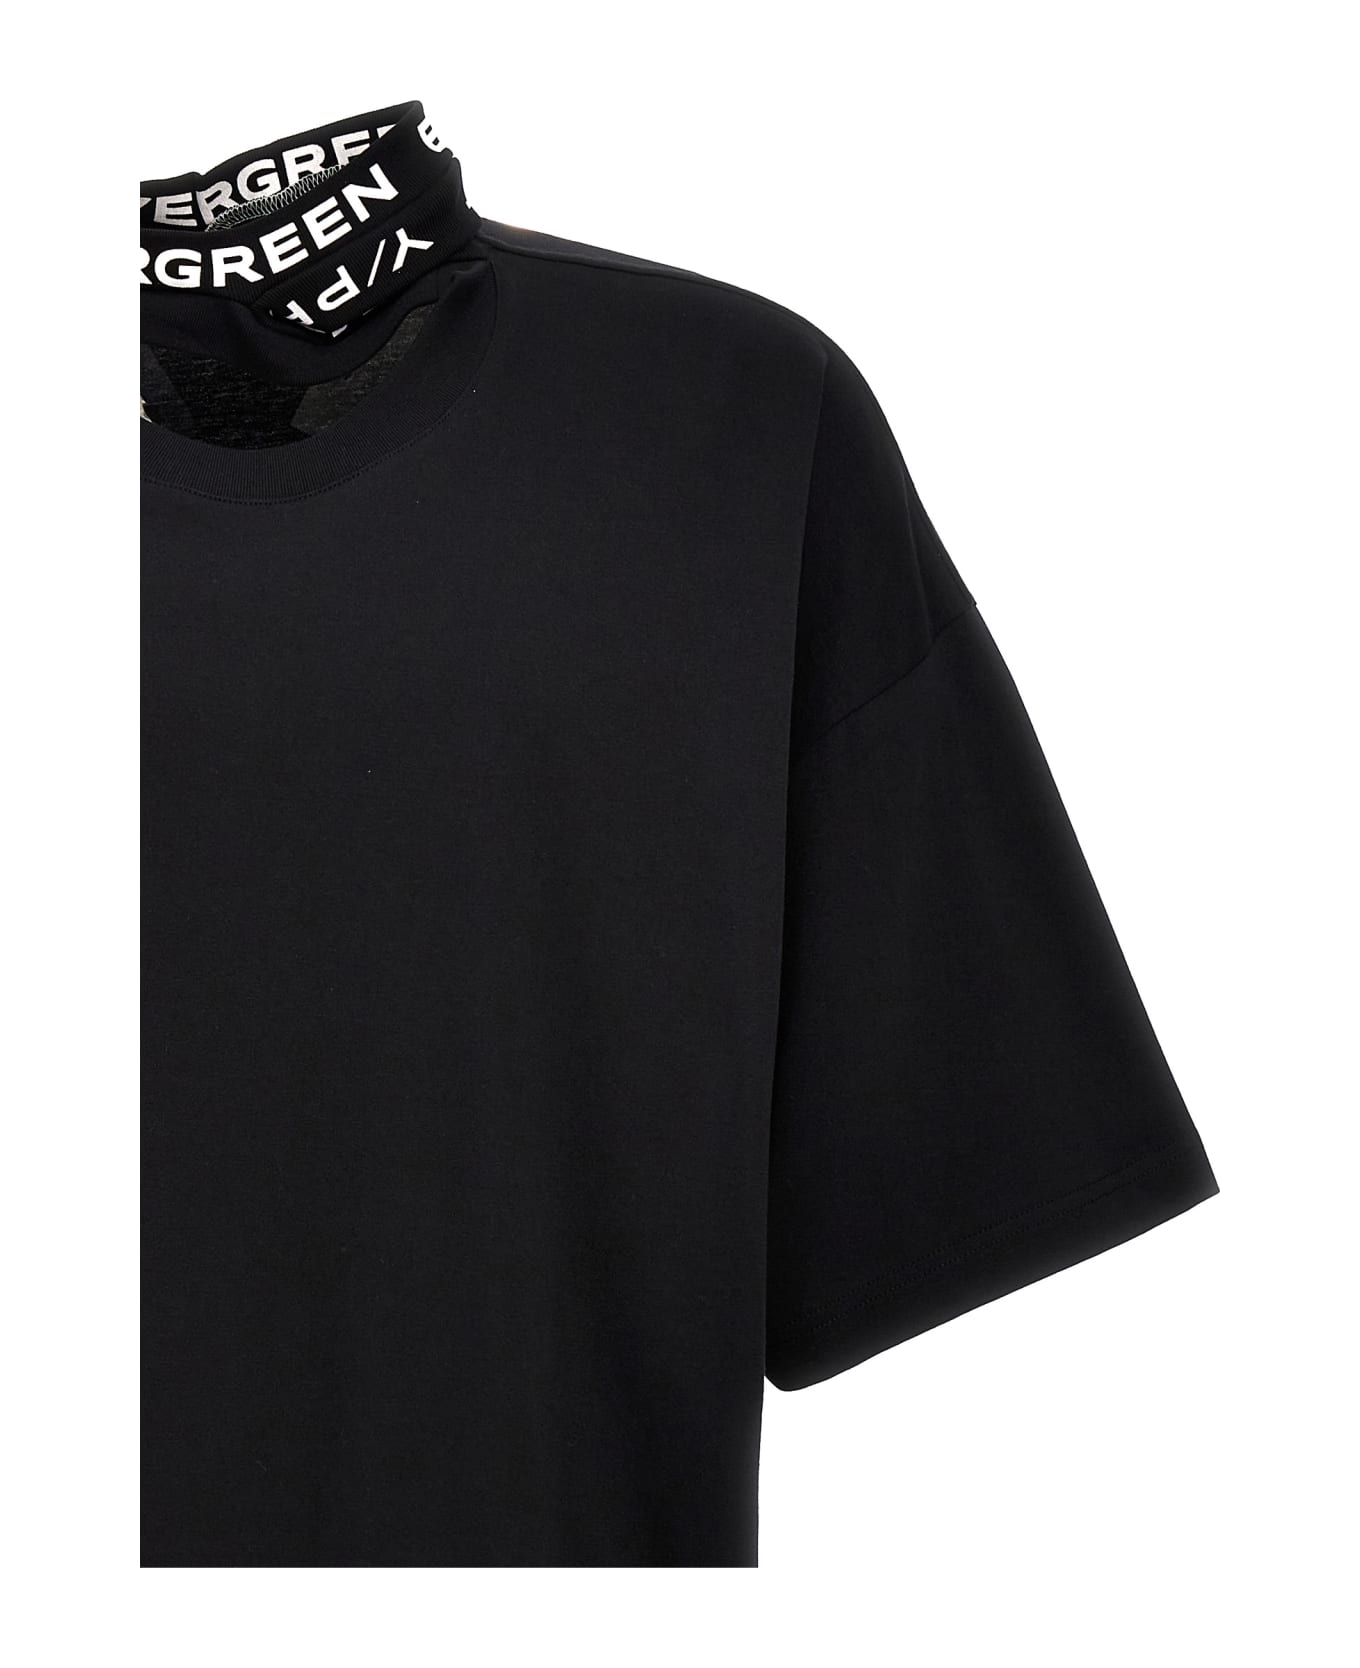 Y/Project 'evergreen' T-shirt - Black  